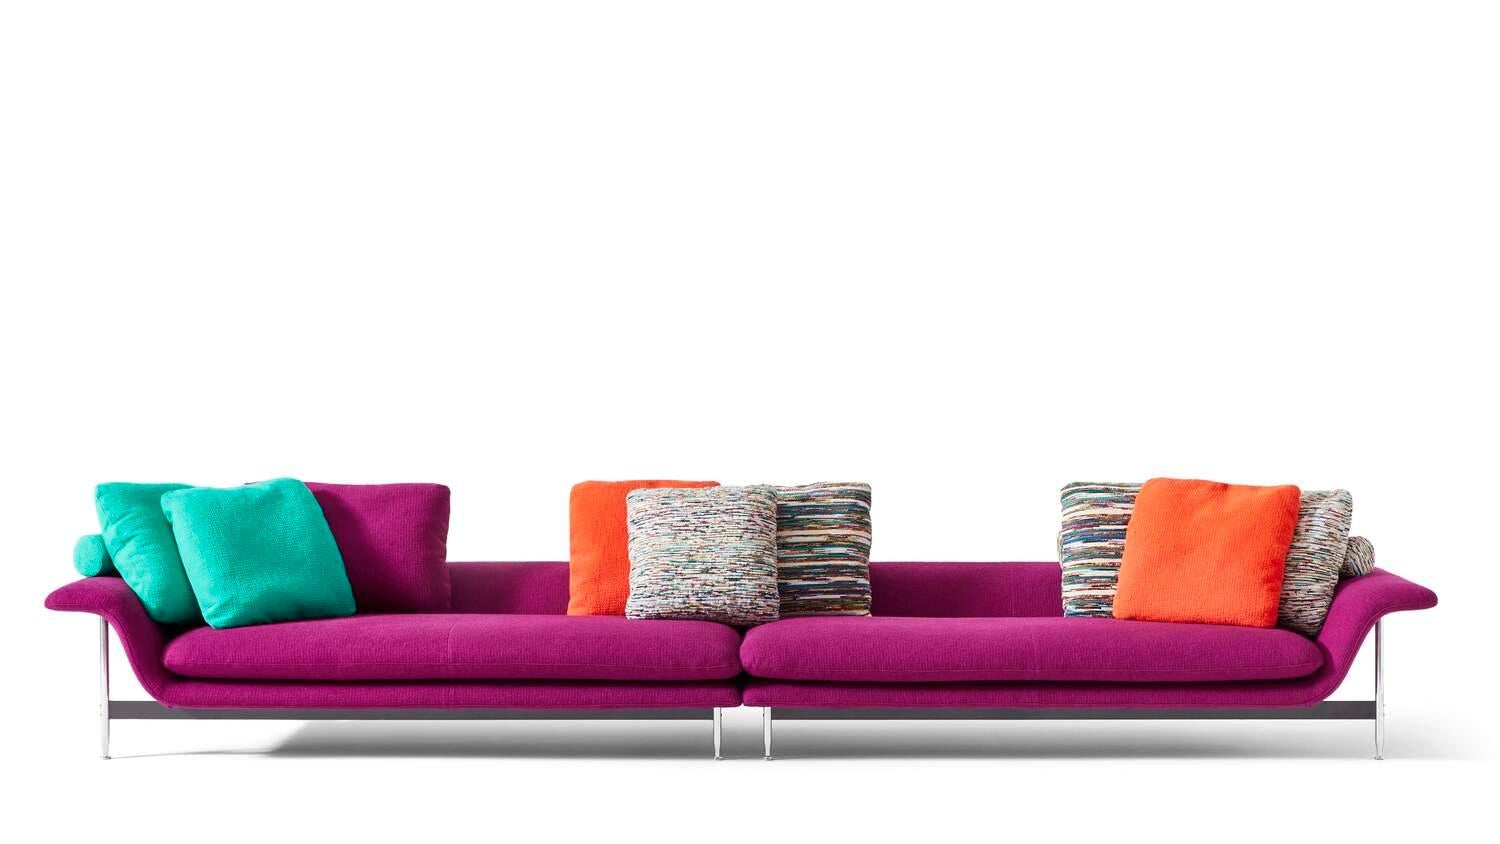 Antonio Citterio Esosoft sofa
Manufactured by Cassina in Itlay

A living room system designed to define the domestic landscape in a fluid, flexible manner. This is Esosoft ? the first project by Antonio Citterio for Cassina ? a modular sofa that